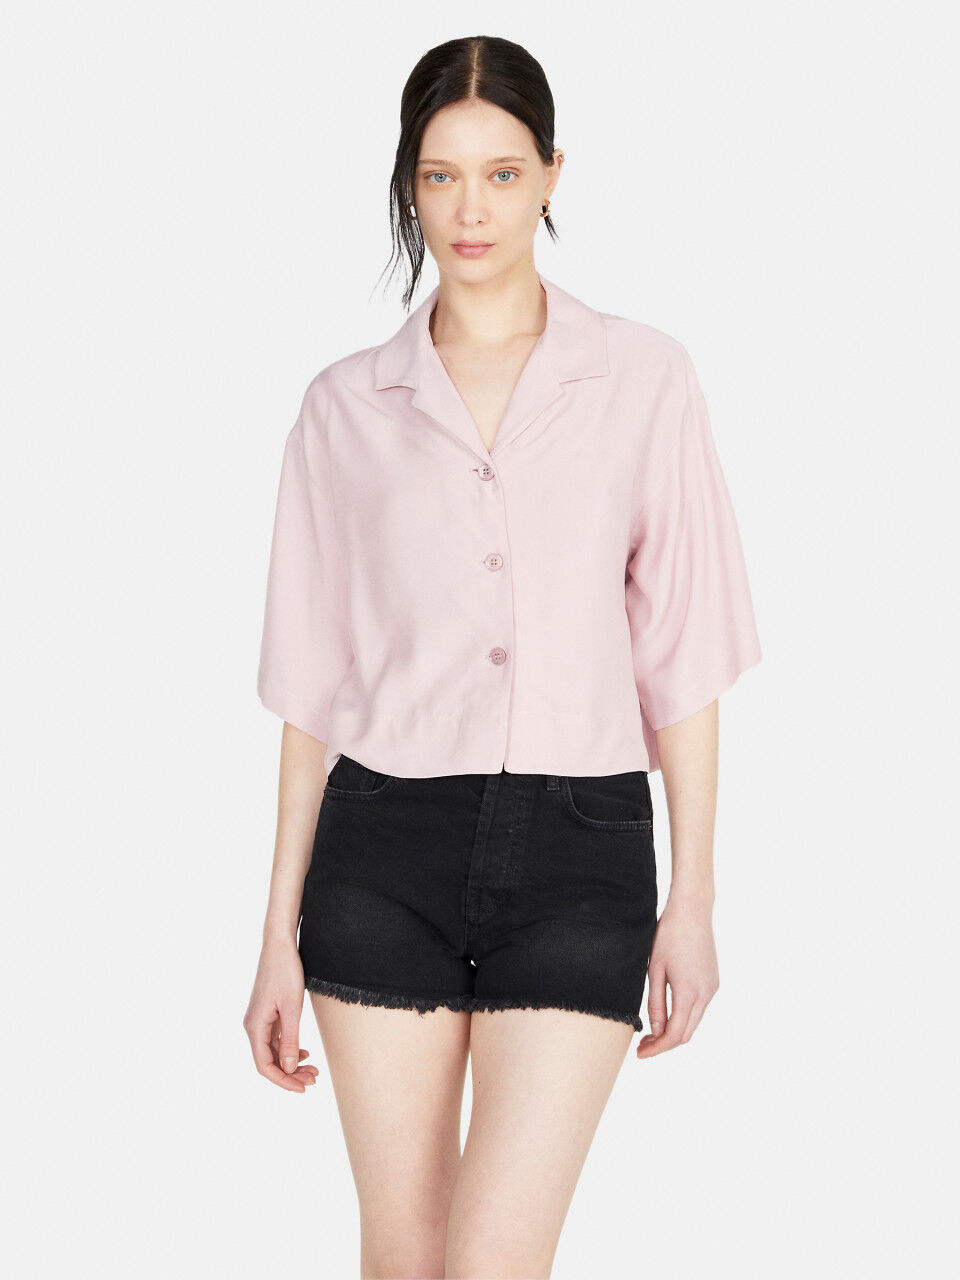 Boxy fit shirt with short sleeves